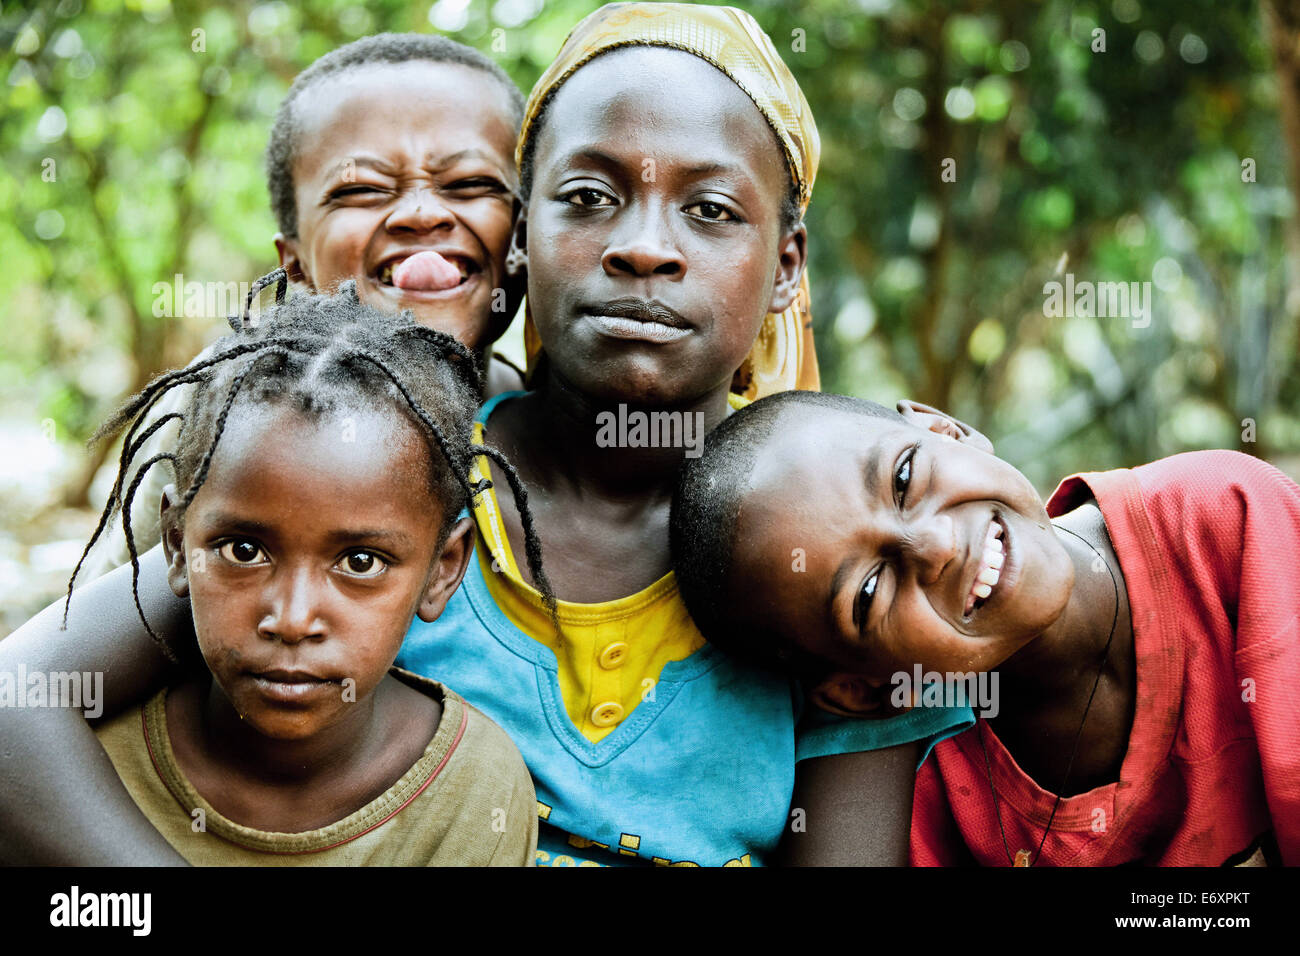 Three children and a young woman from the Ari tribe, Jinka, South Ethiopia, Africa Stock Photo